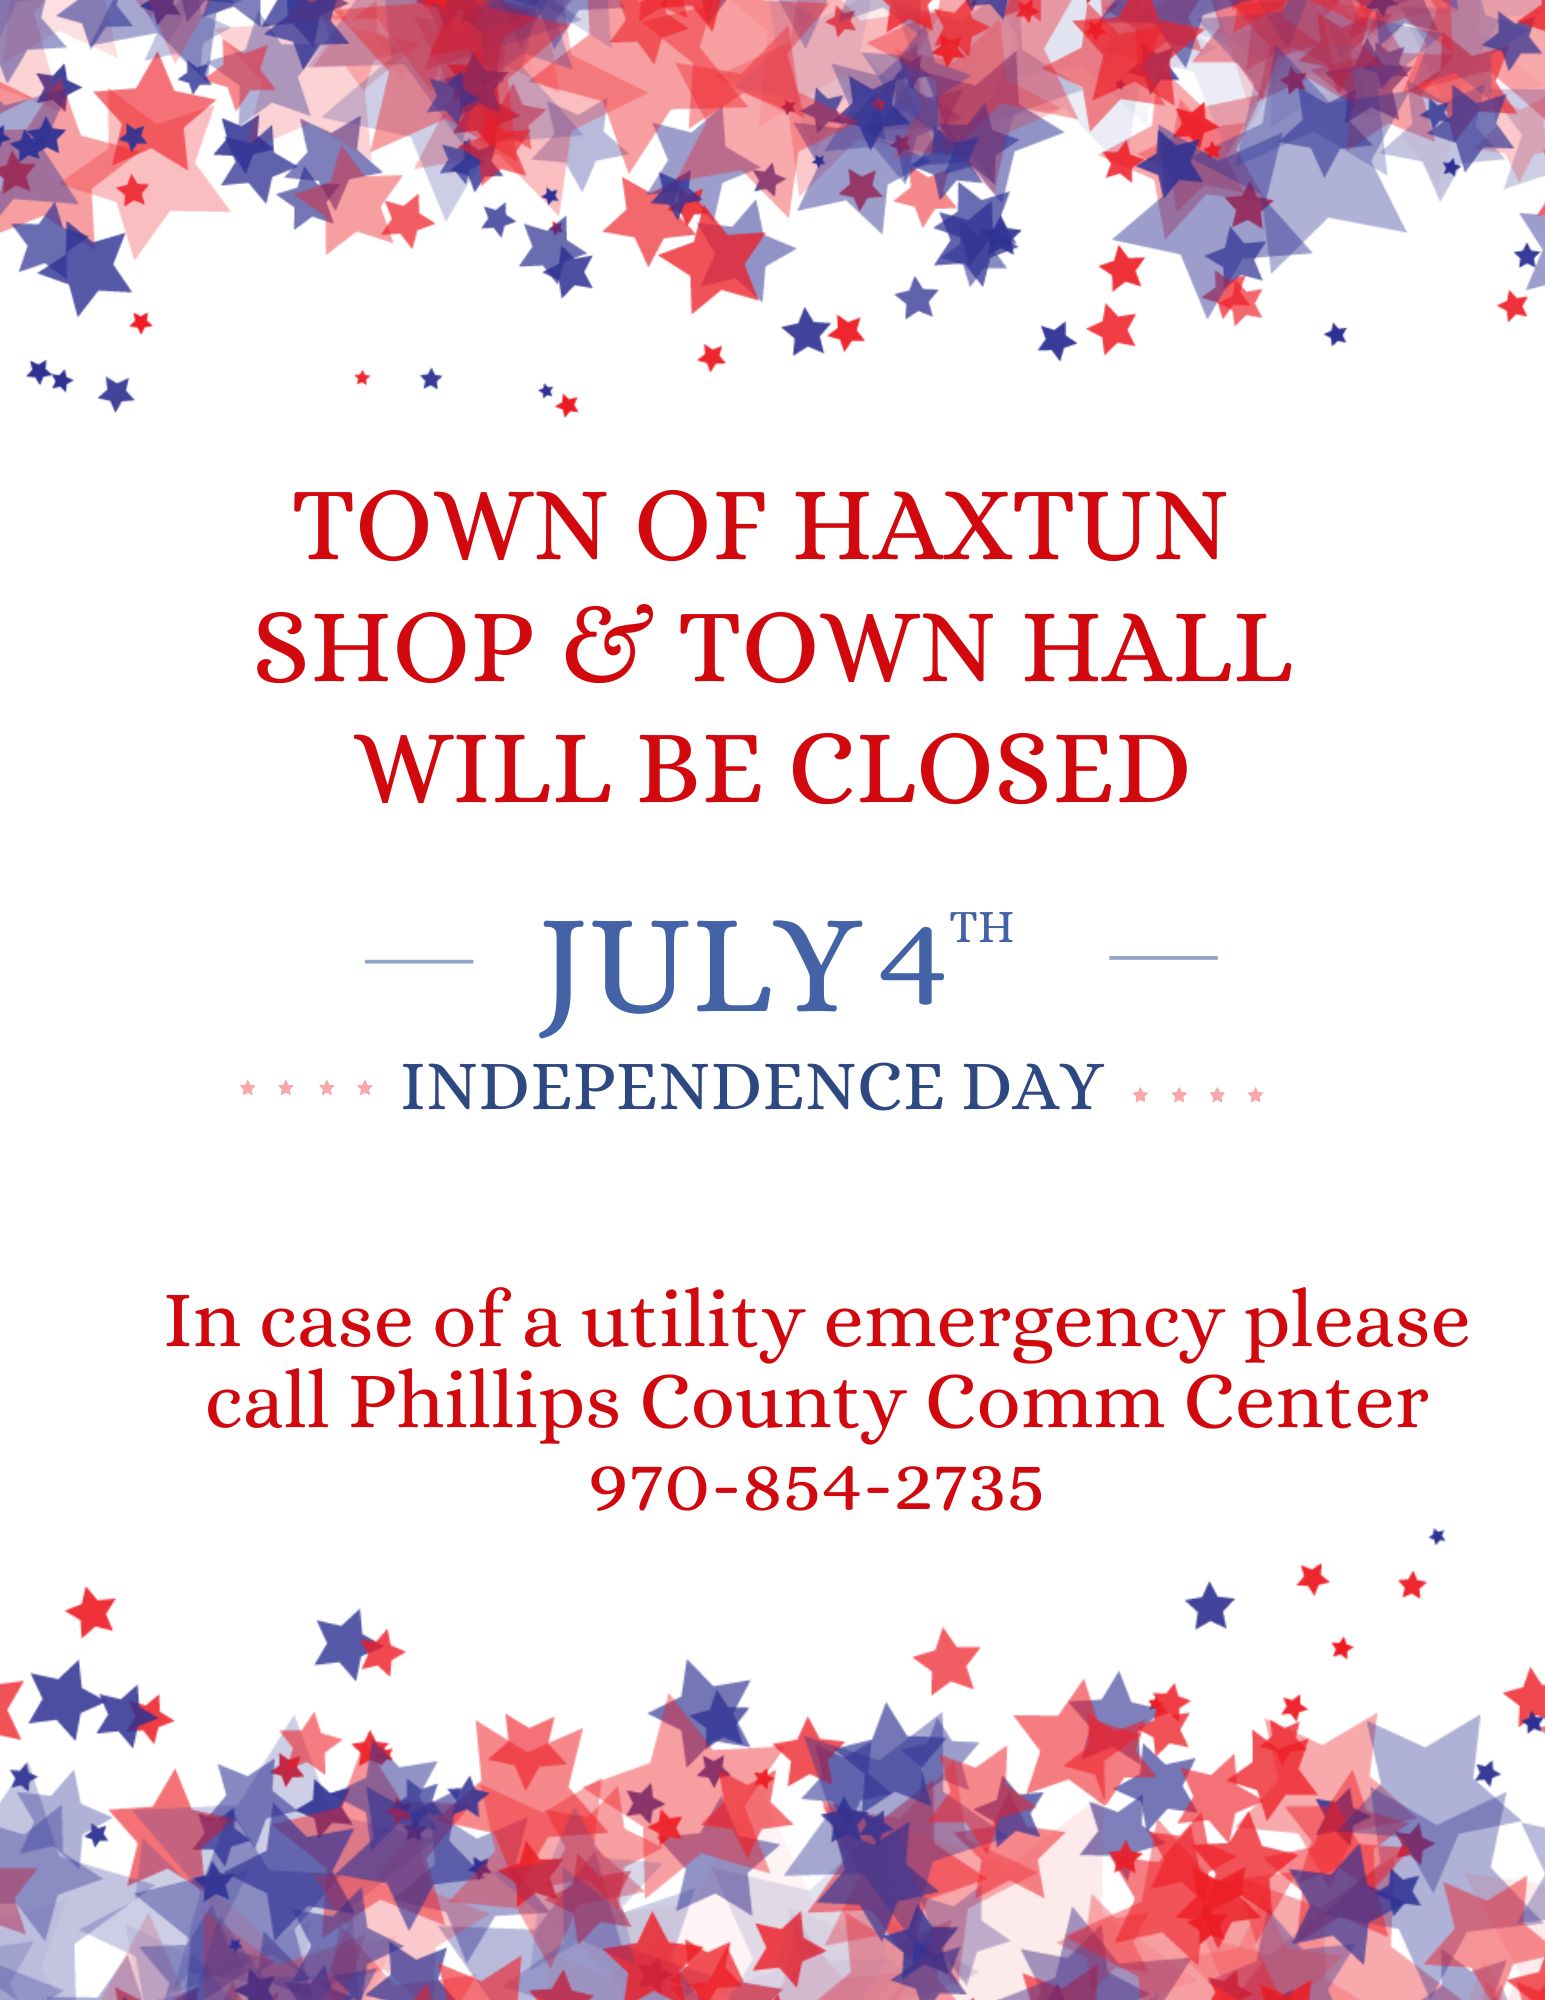 Town of Haxtun Shop & Town Hall will be closed July 4 Independence Day.  In case of a utility emergency please call Phillips County Comm Center 970-854-2735